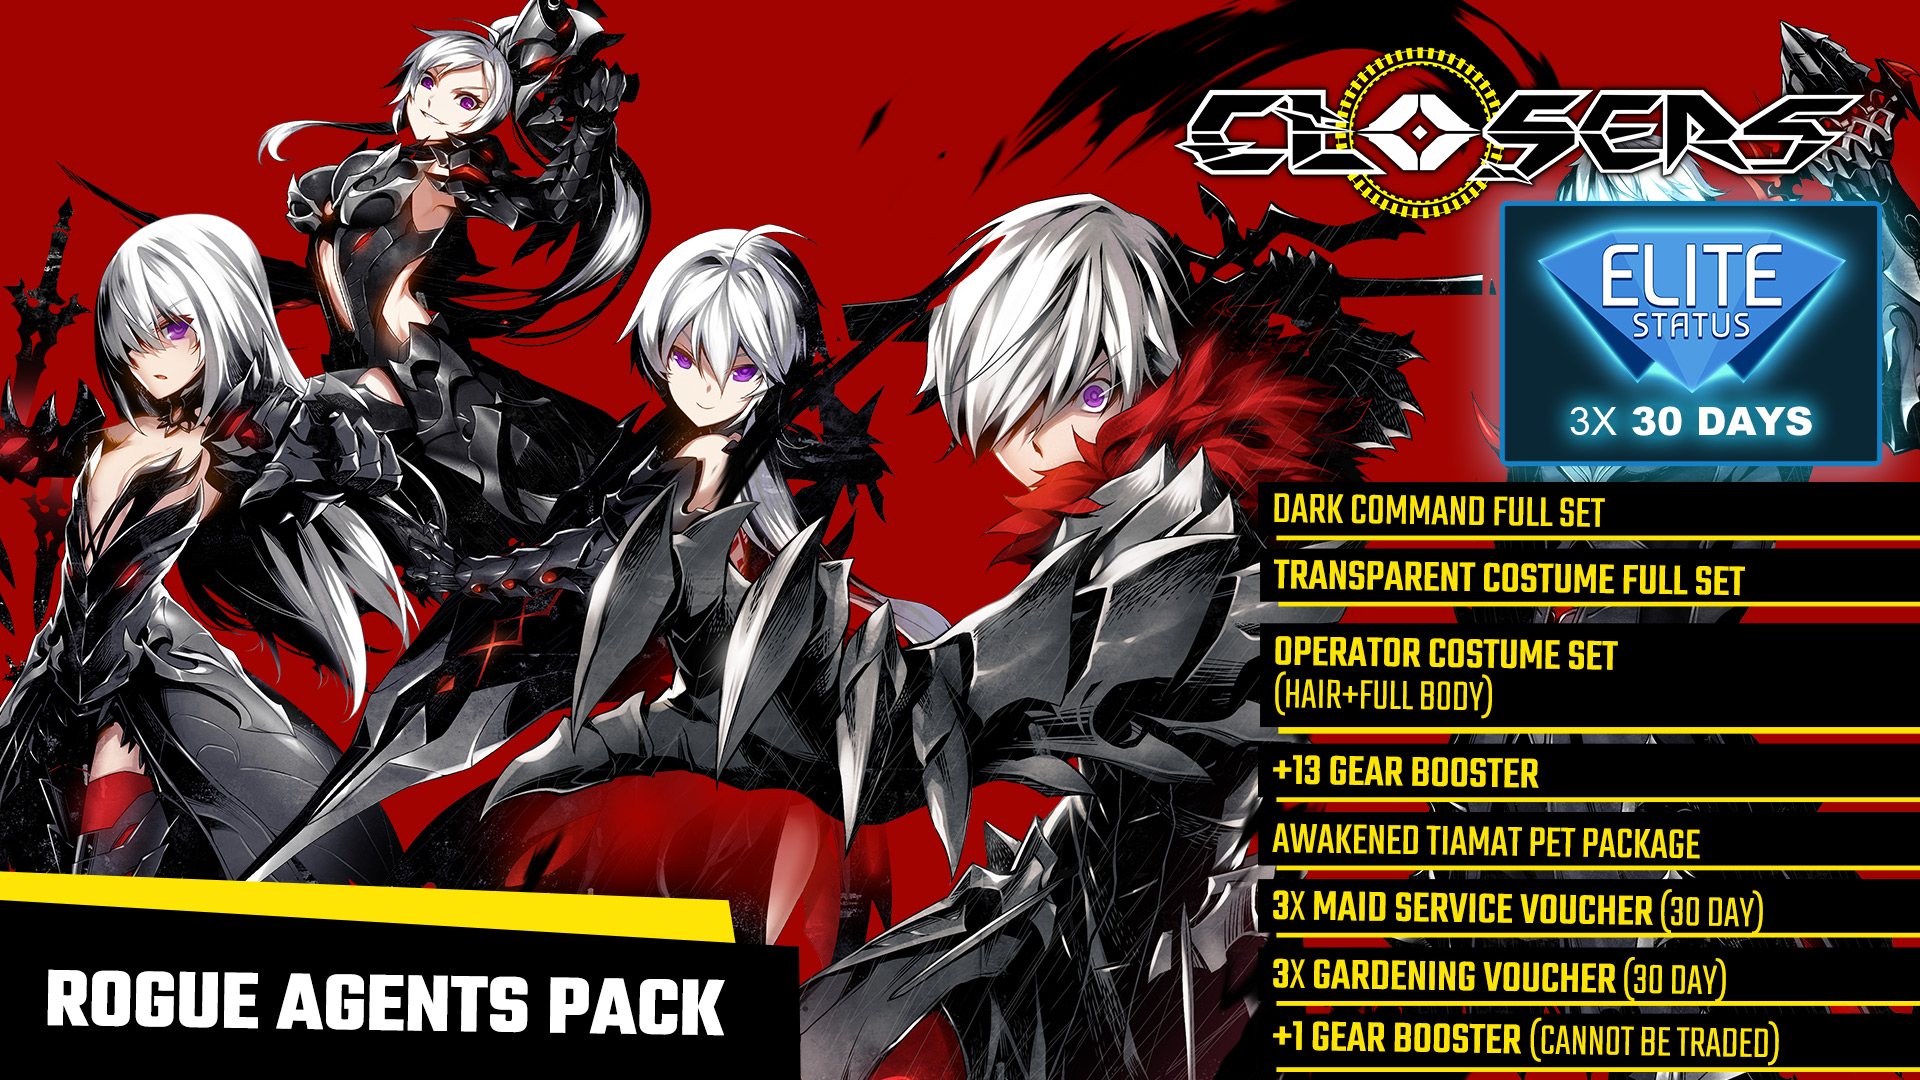 Closers: Rogue Agents Pack Featured Screenshot #1